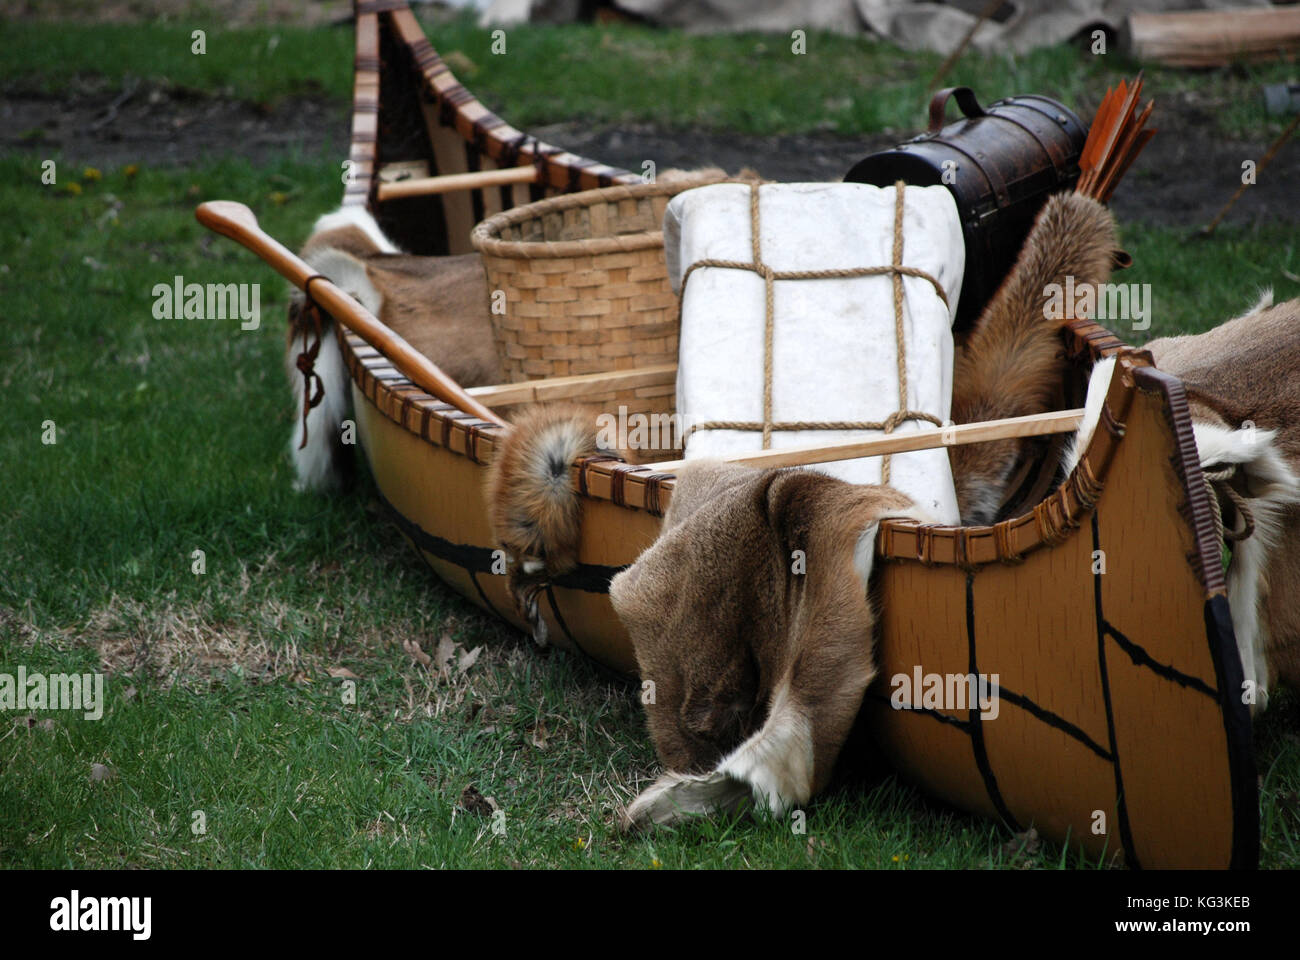 Homemade native American canoe with fur pelts and basket Stock Photo